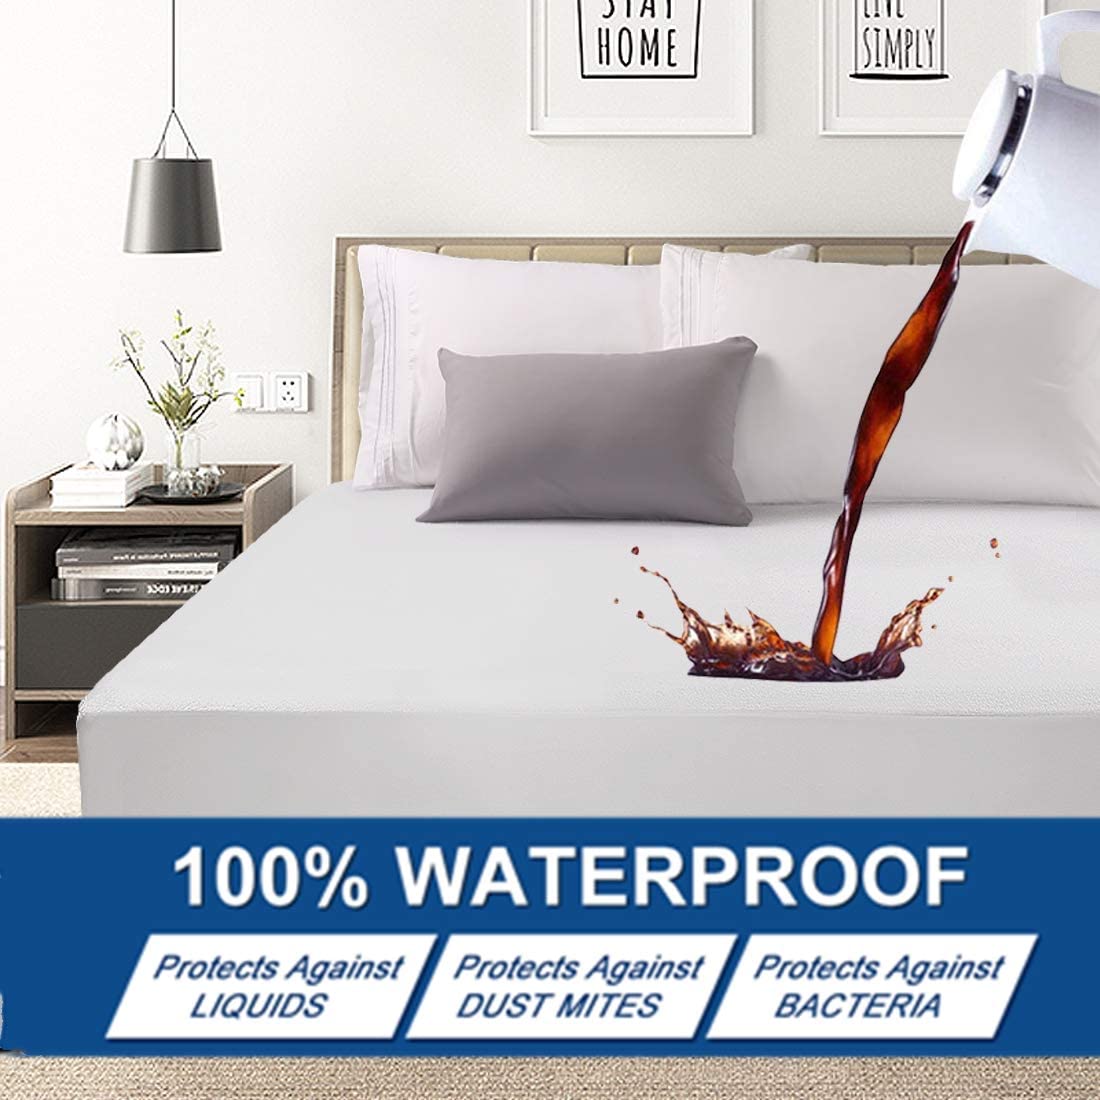 The Best Waterproof Mattress Covers in 2022 Reviews